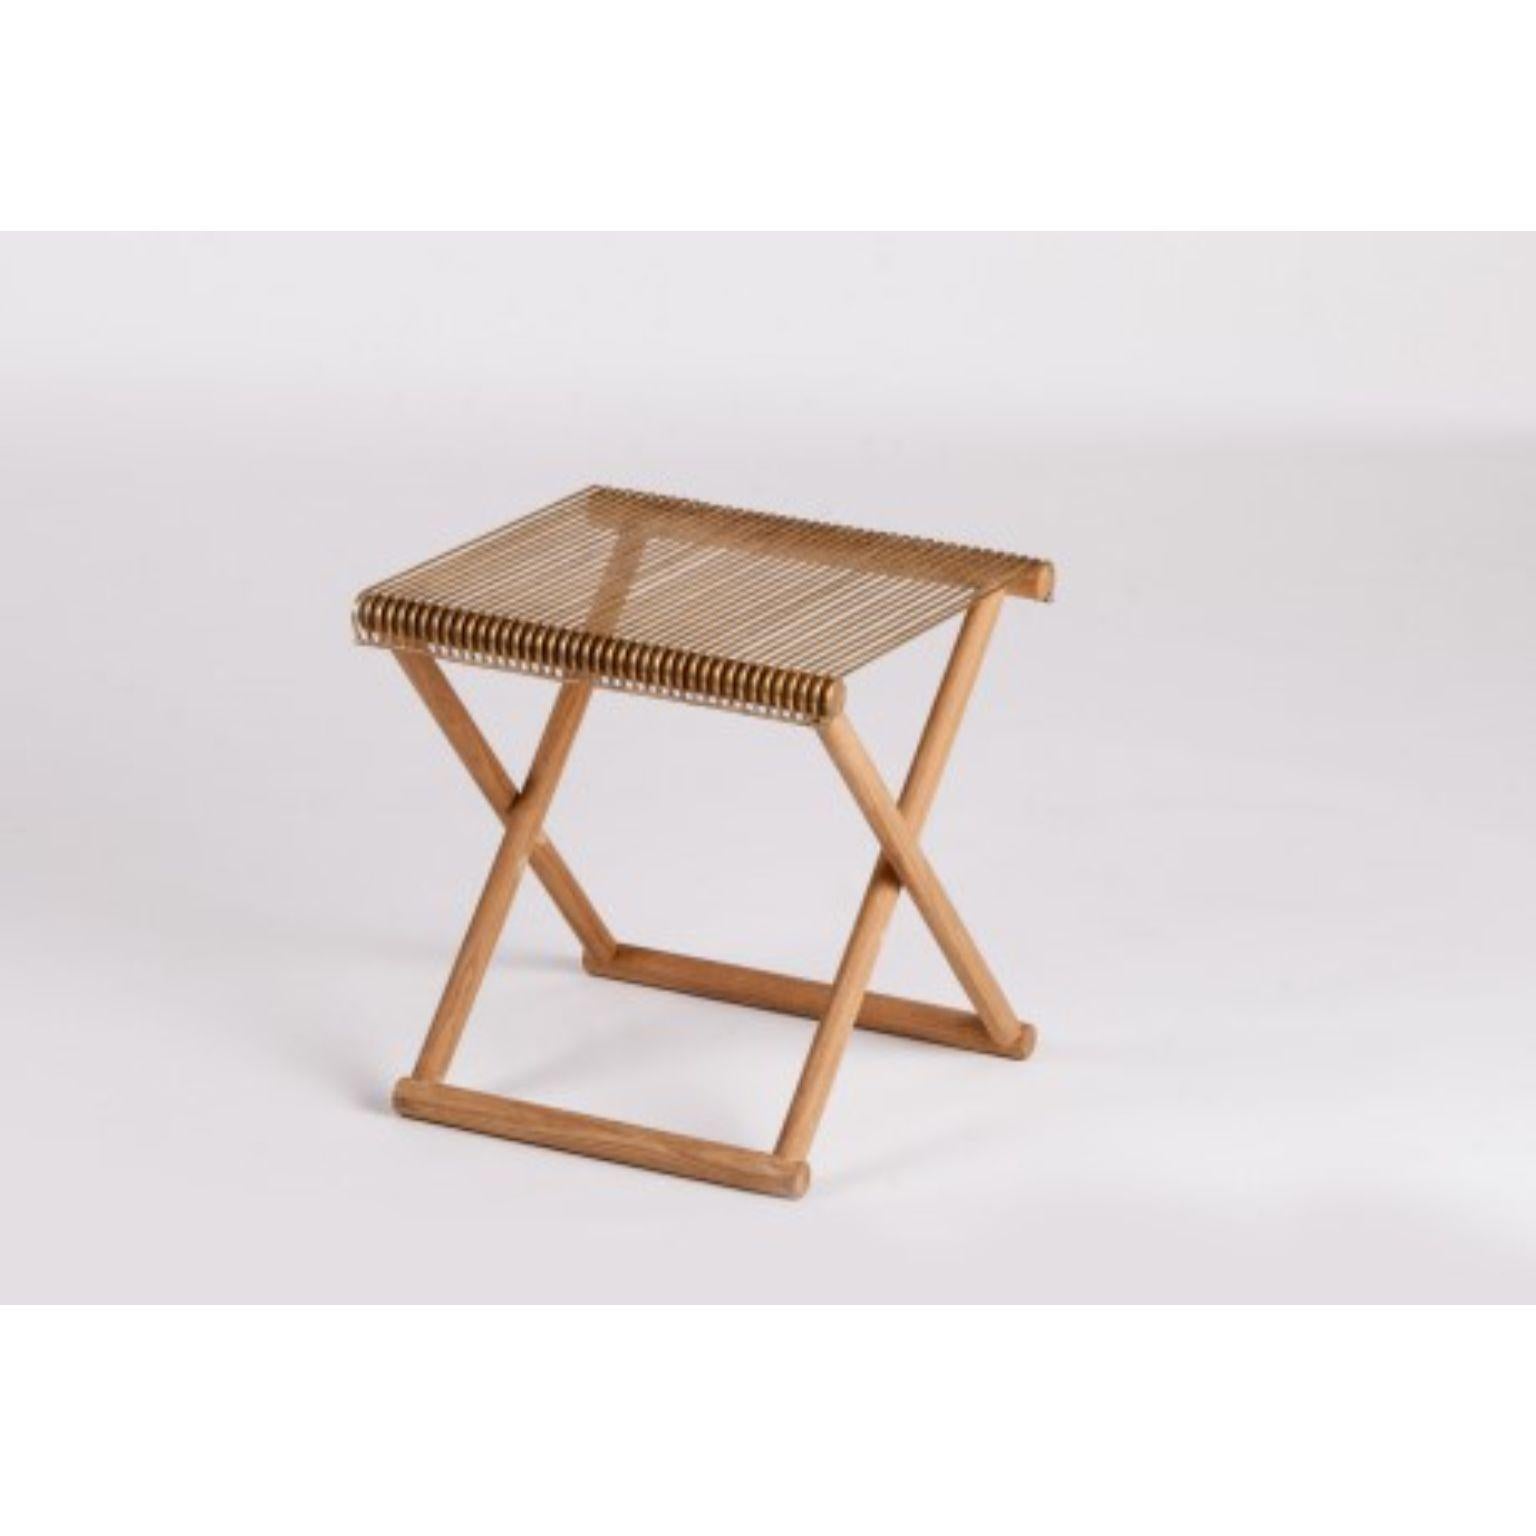 Trestle side table by Mingardo
Dimensions: D 20 x W 10 x H 42.4 cm 
Materials: Nat. Or wengé oak wood structure. Satin nat. Brass/or copper rods top
Weight: 9 kg

Also available in different finishes. 

The tables of Trestle collection are